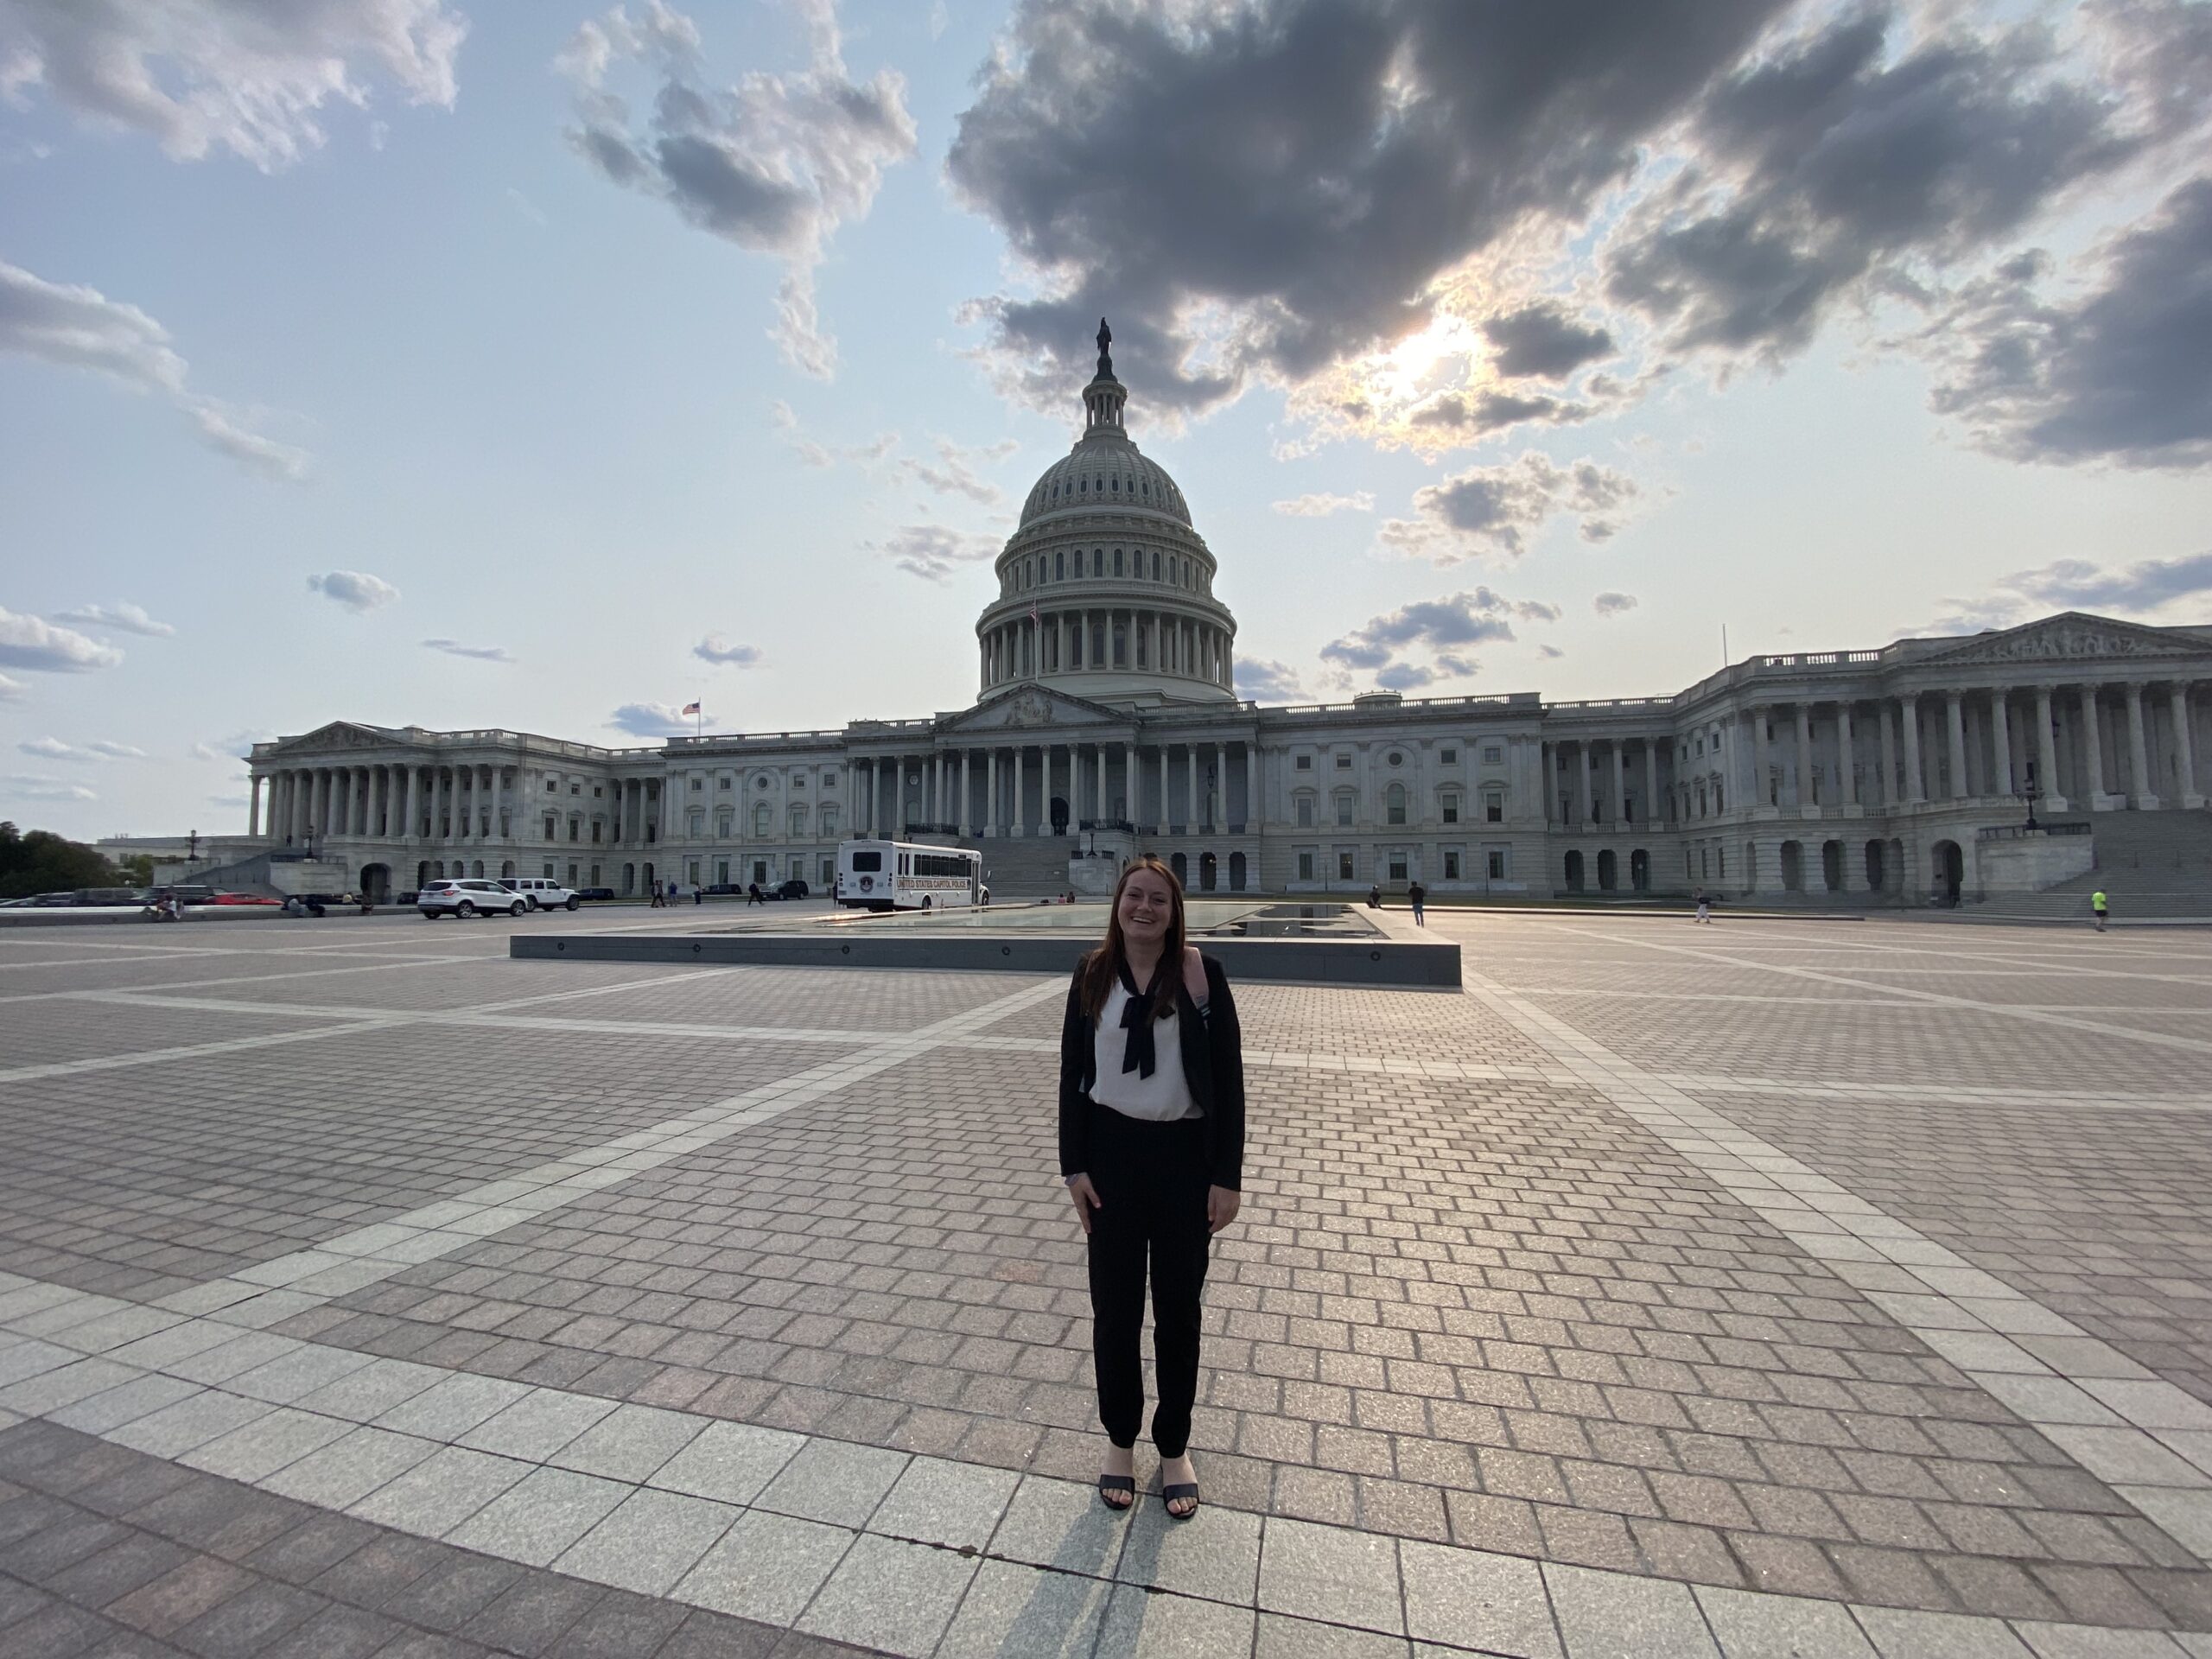 Photo: Haven Cashwell in front of the U.S. Capitol Building